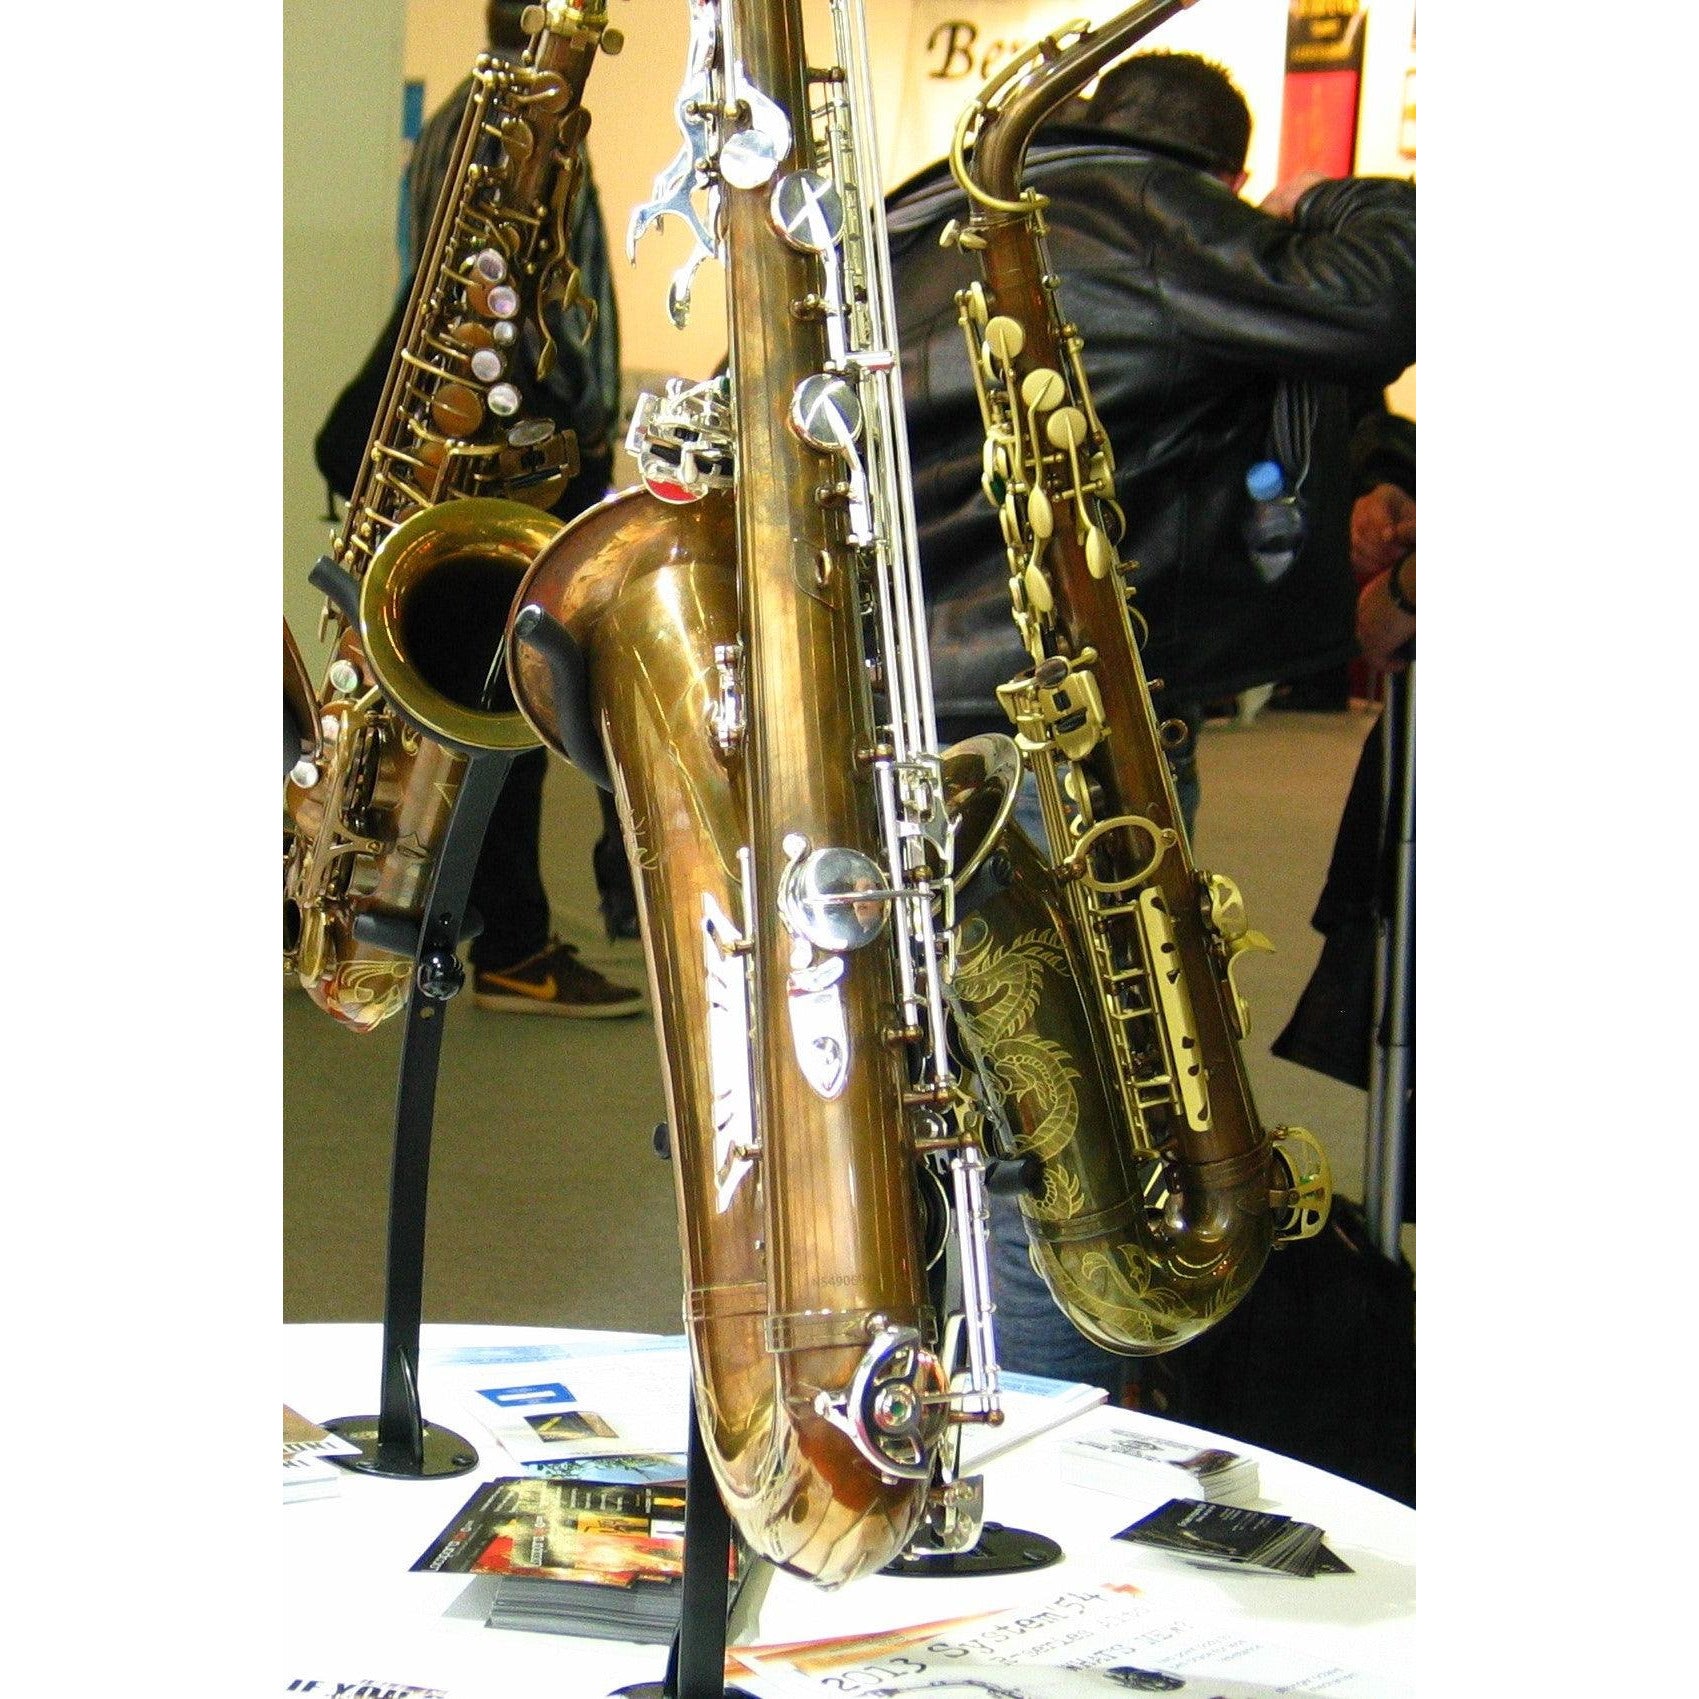 several saxophones at tradeshow in exhibit desktop tenor saxophone stands with instruments on display in the wallmounts made by Locoparasaxo